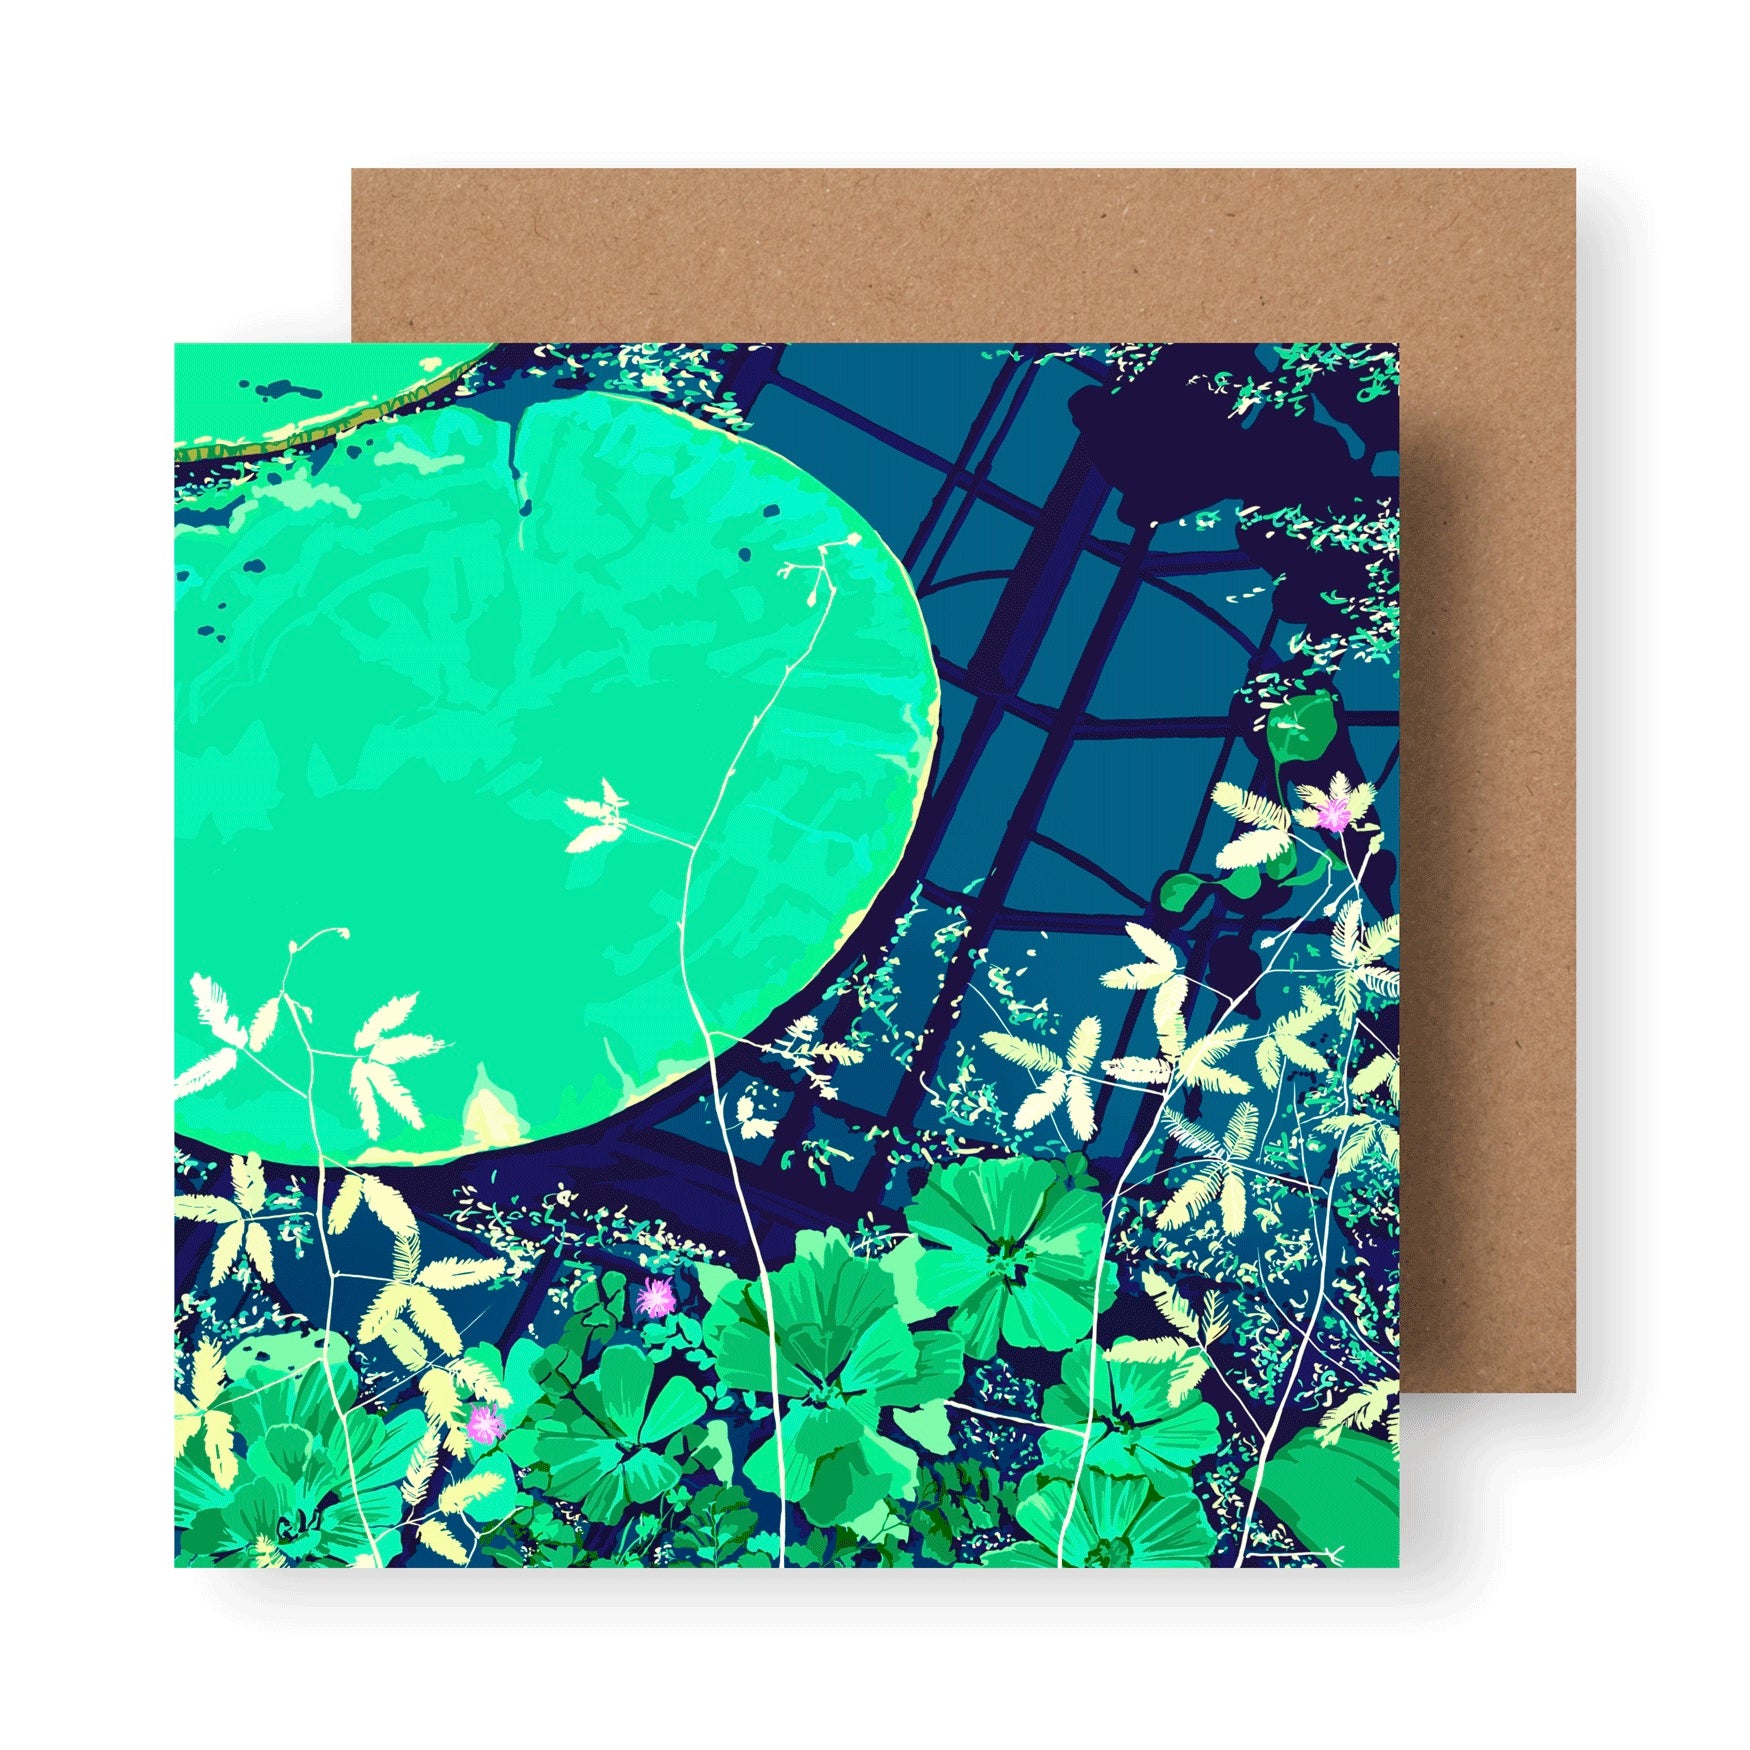 Lily pad illustration in green and blue